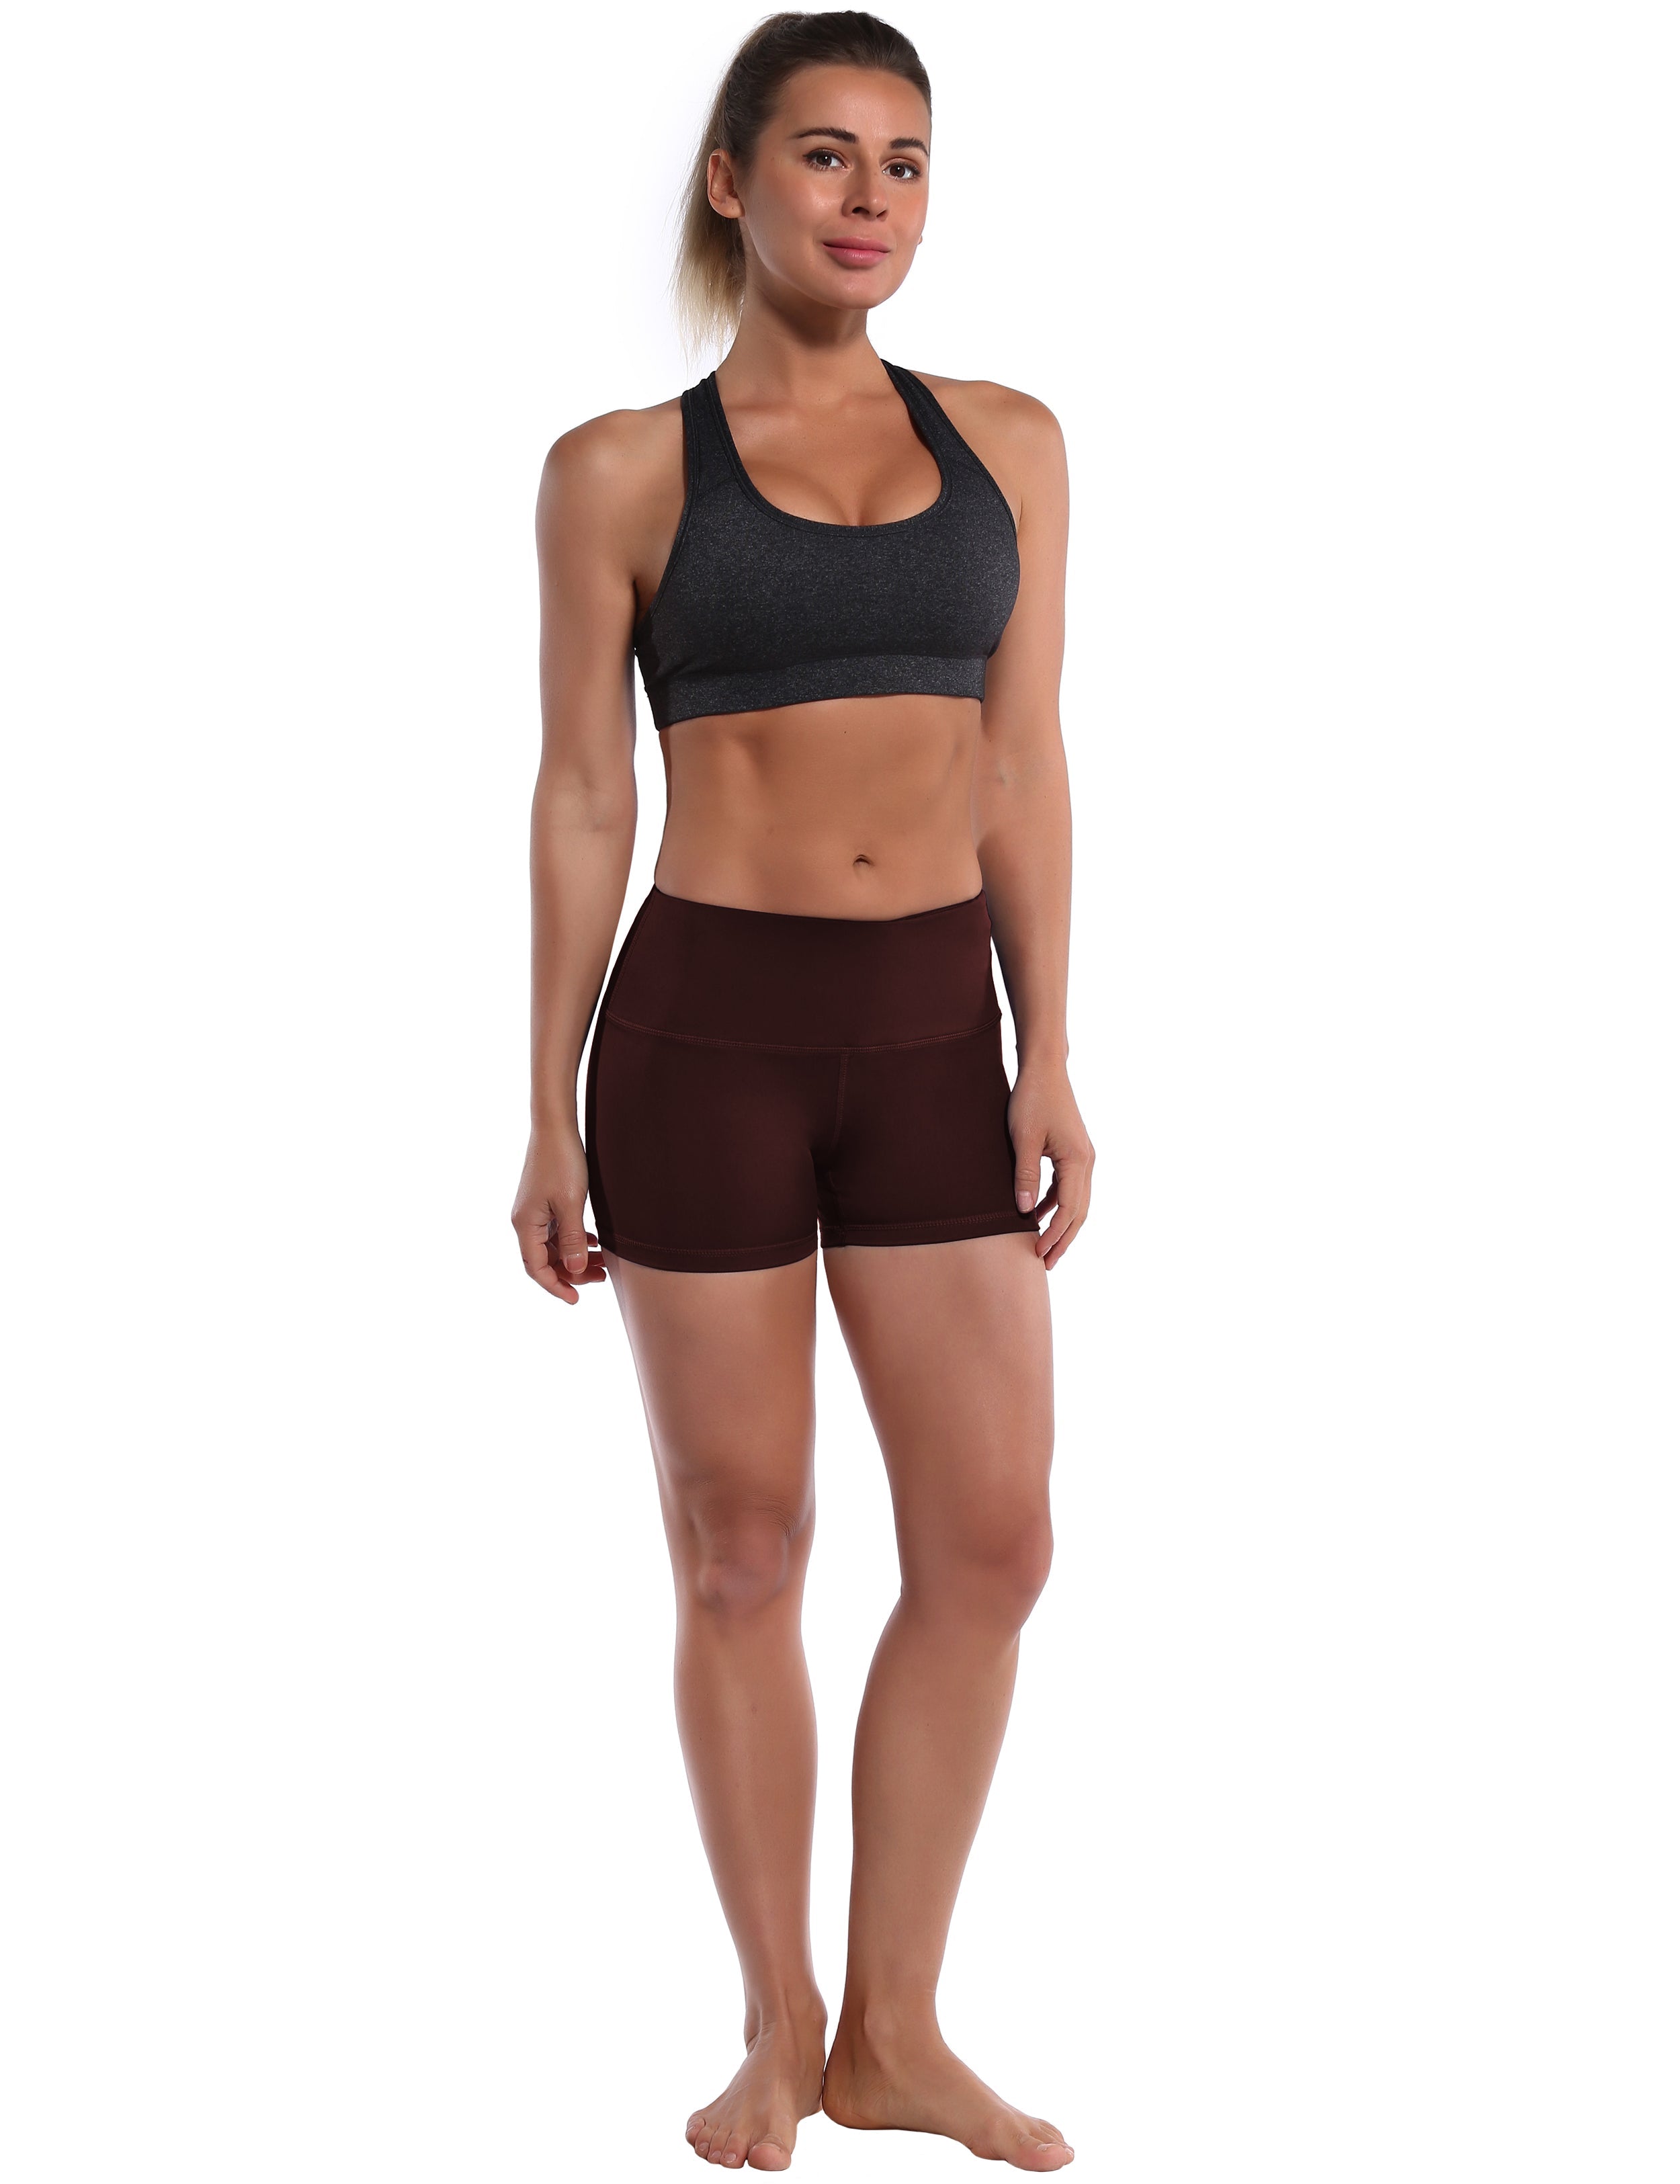 2.5" Jogging Shorts mahoganymaroon Softest-ever fabric High elasticity High density 4-way stretch Fabric doesn't attract lint easily No see-through Moisture-wicking Machine wash 75% Nylon, 25% Spandex